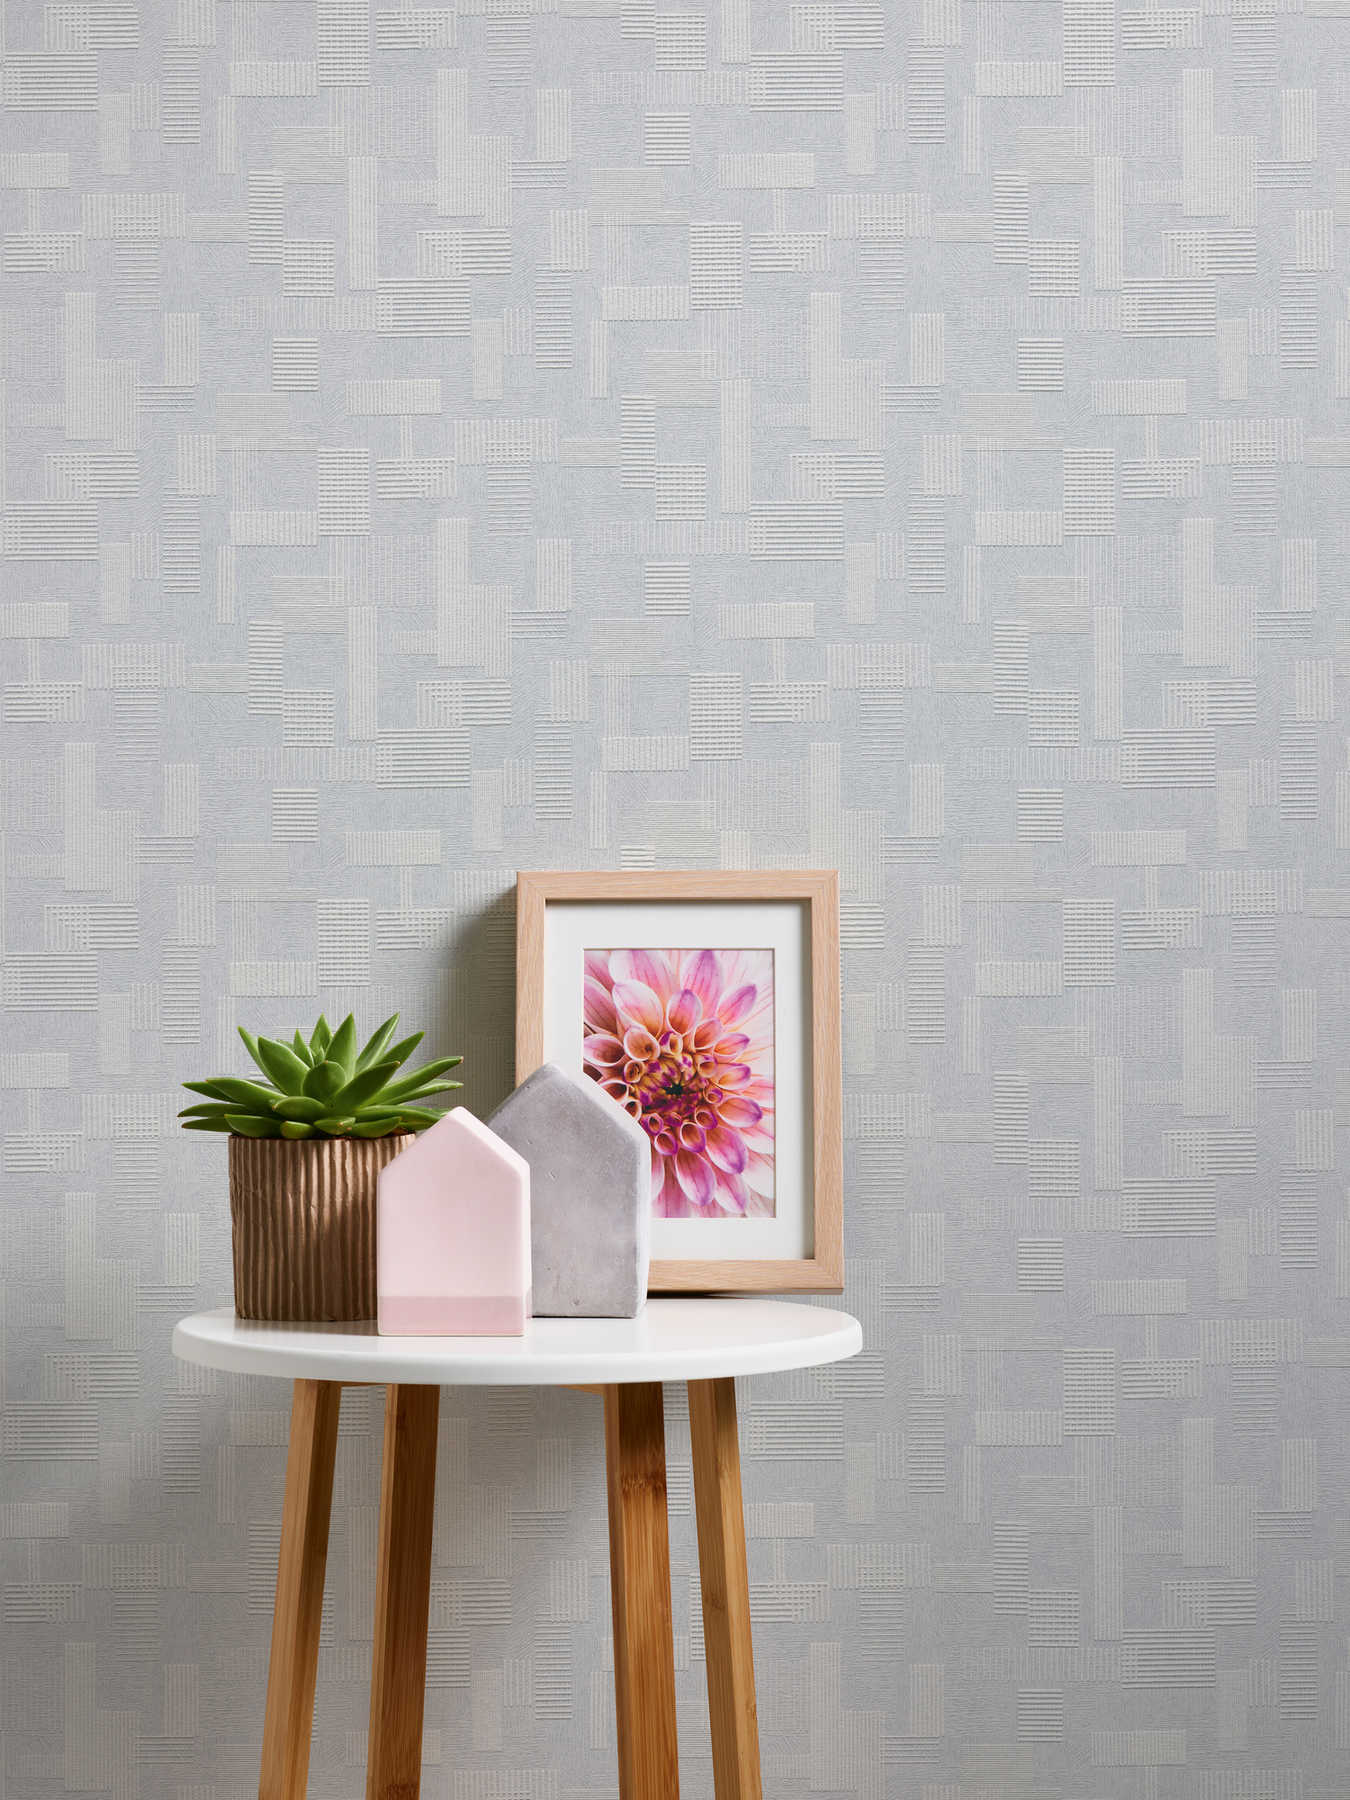             Retro wallpaper with geometric design and 3D effect - Paintable, White
        